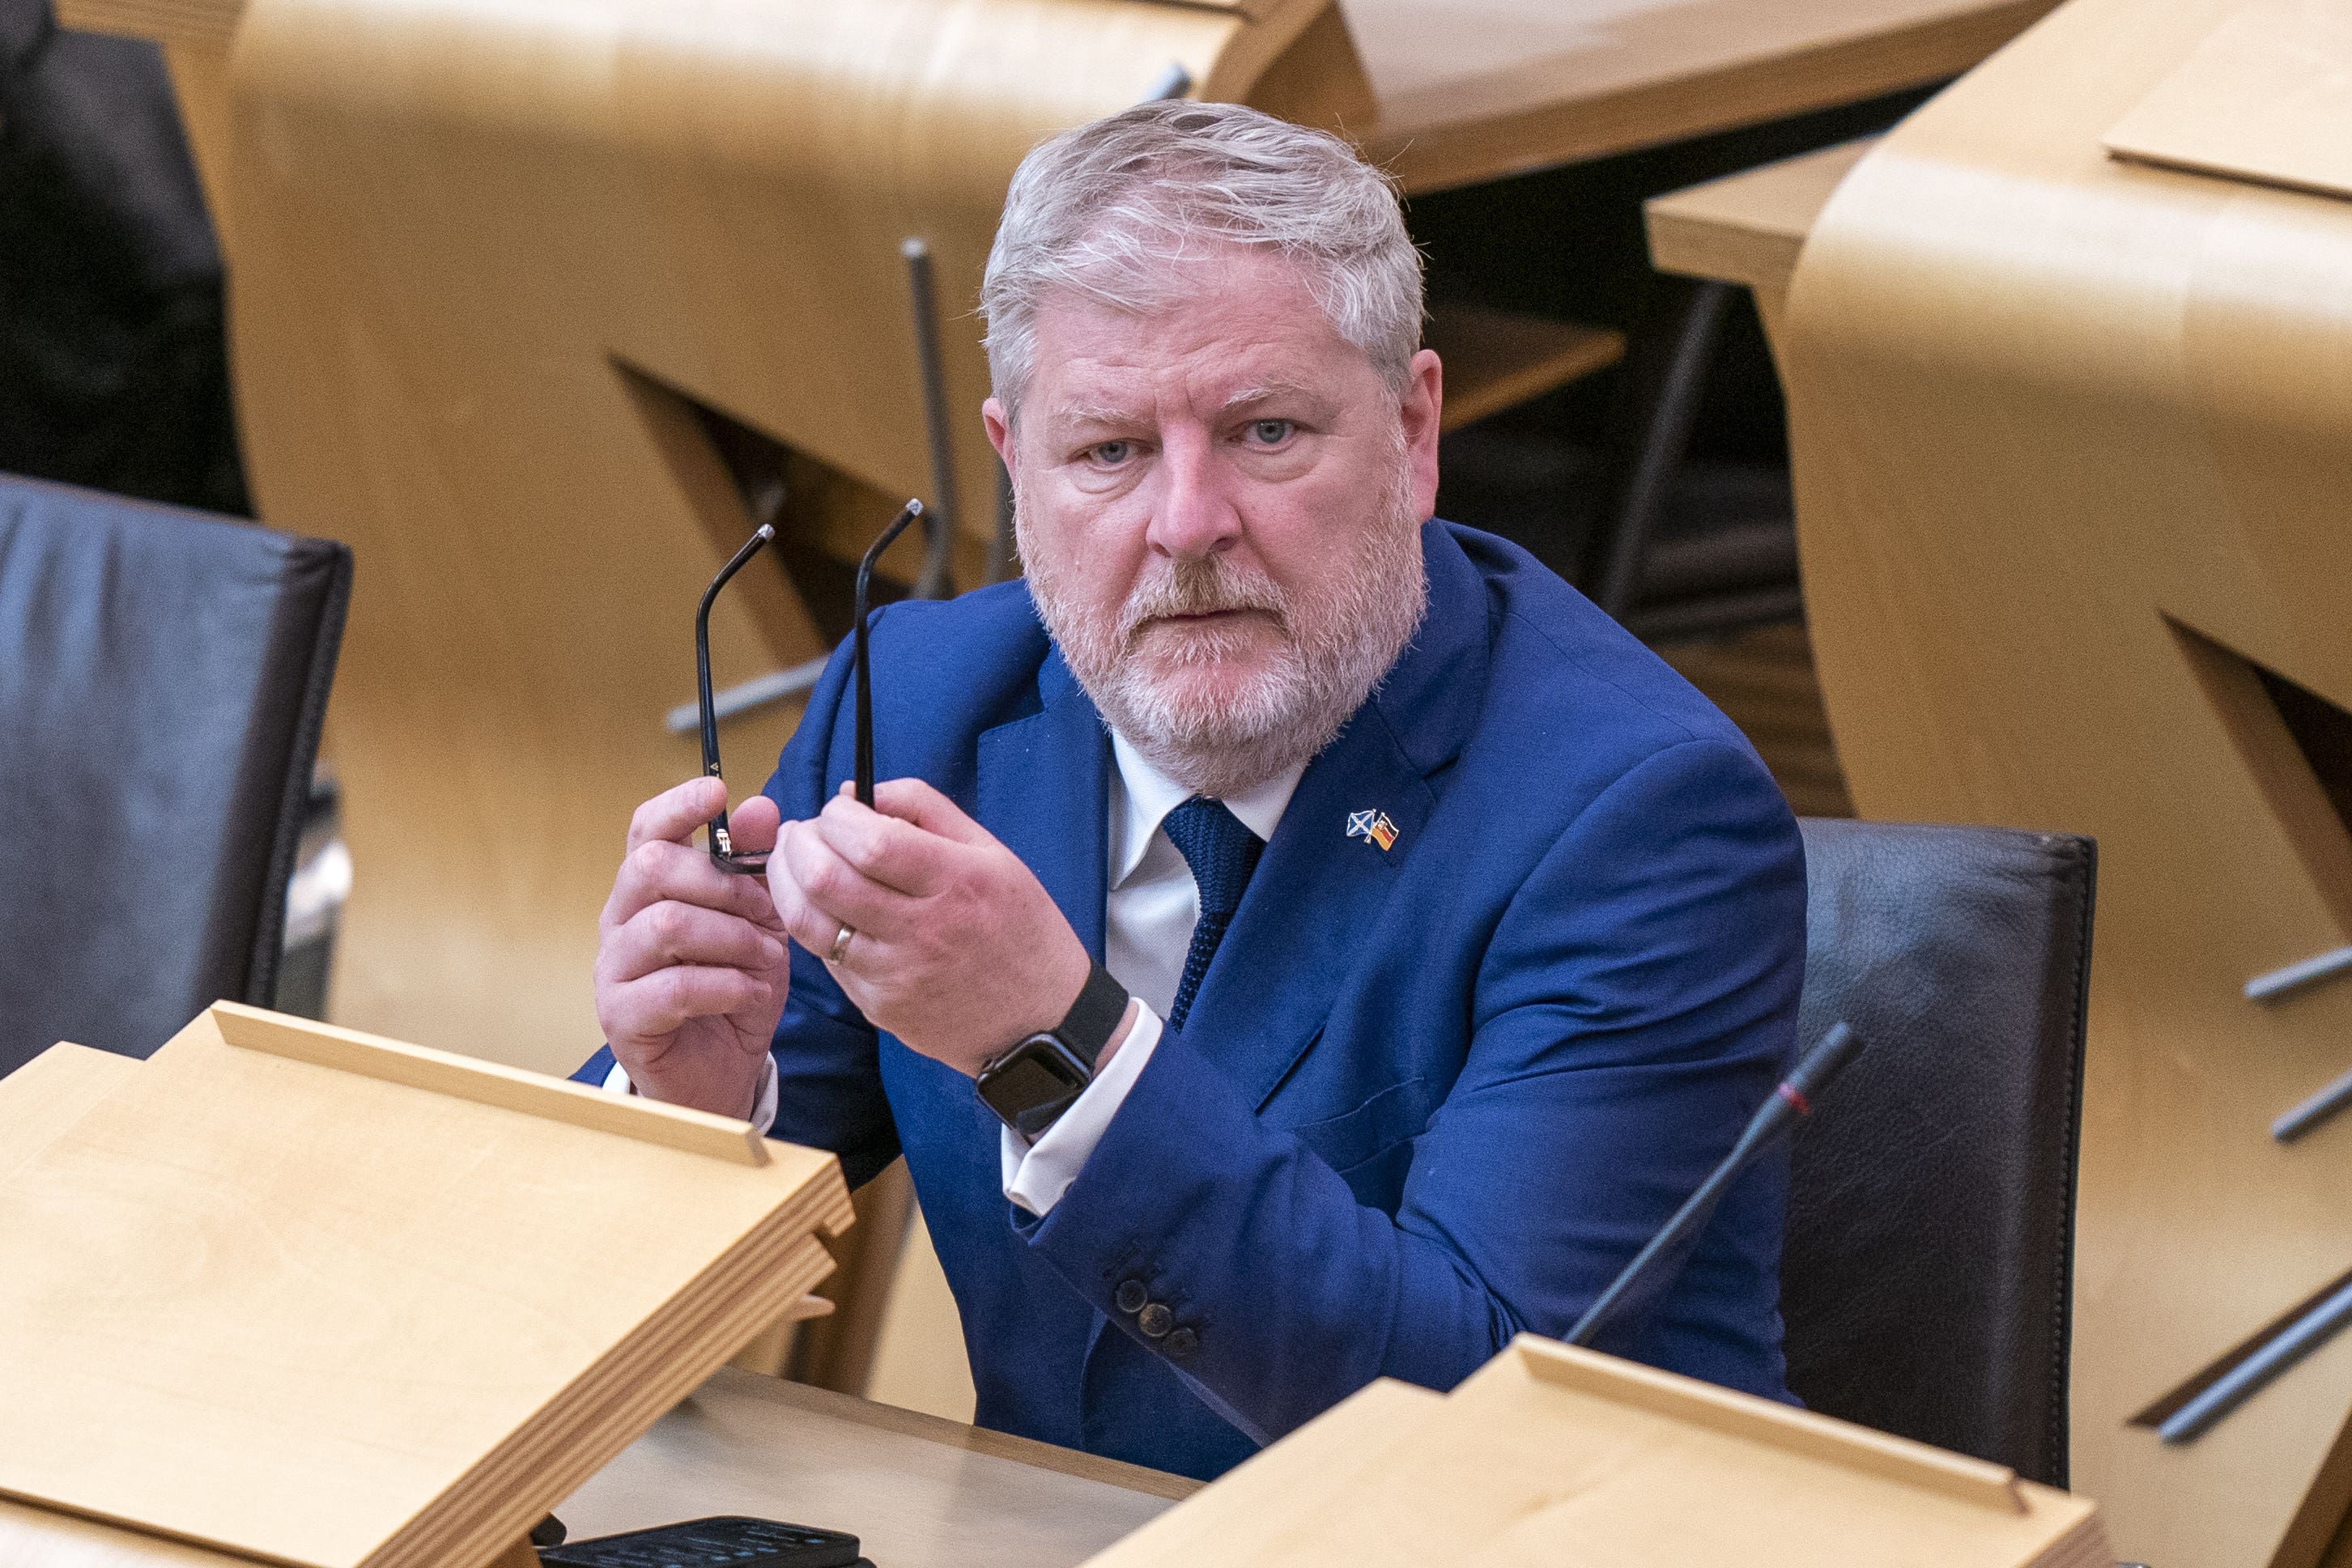 Scottish External Affairs Secretary Angus Robertson ‘took offence’ over new guidance issued regarding the Scottish Government’s meetings with overseas adminsitrations, Alister Jack said. (Jane Barlow/PA)